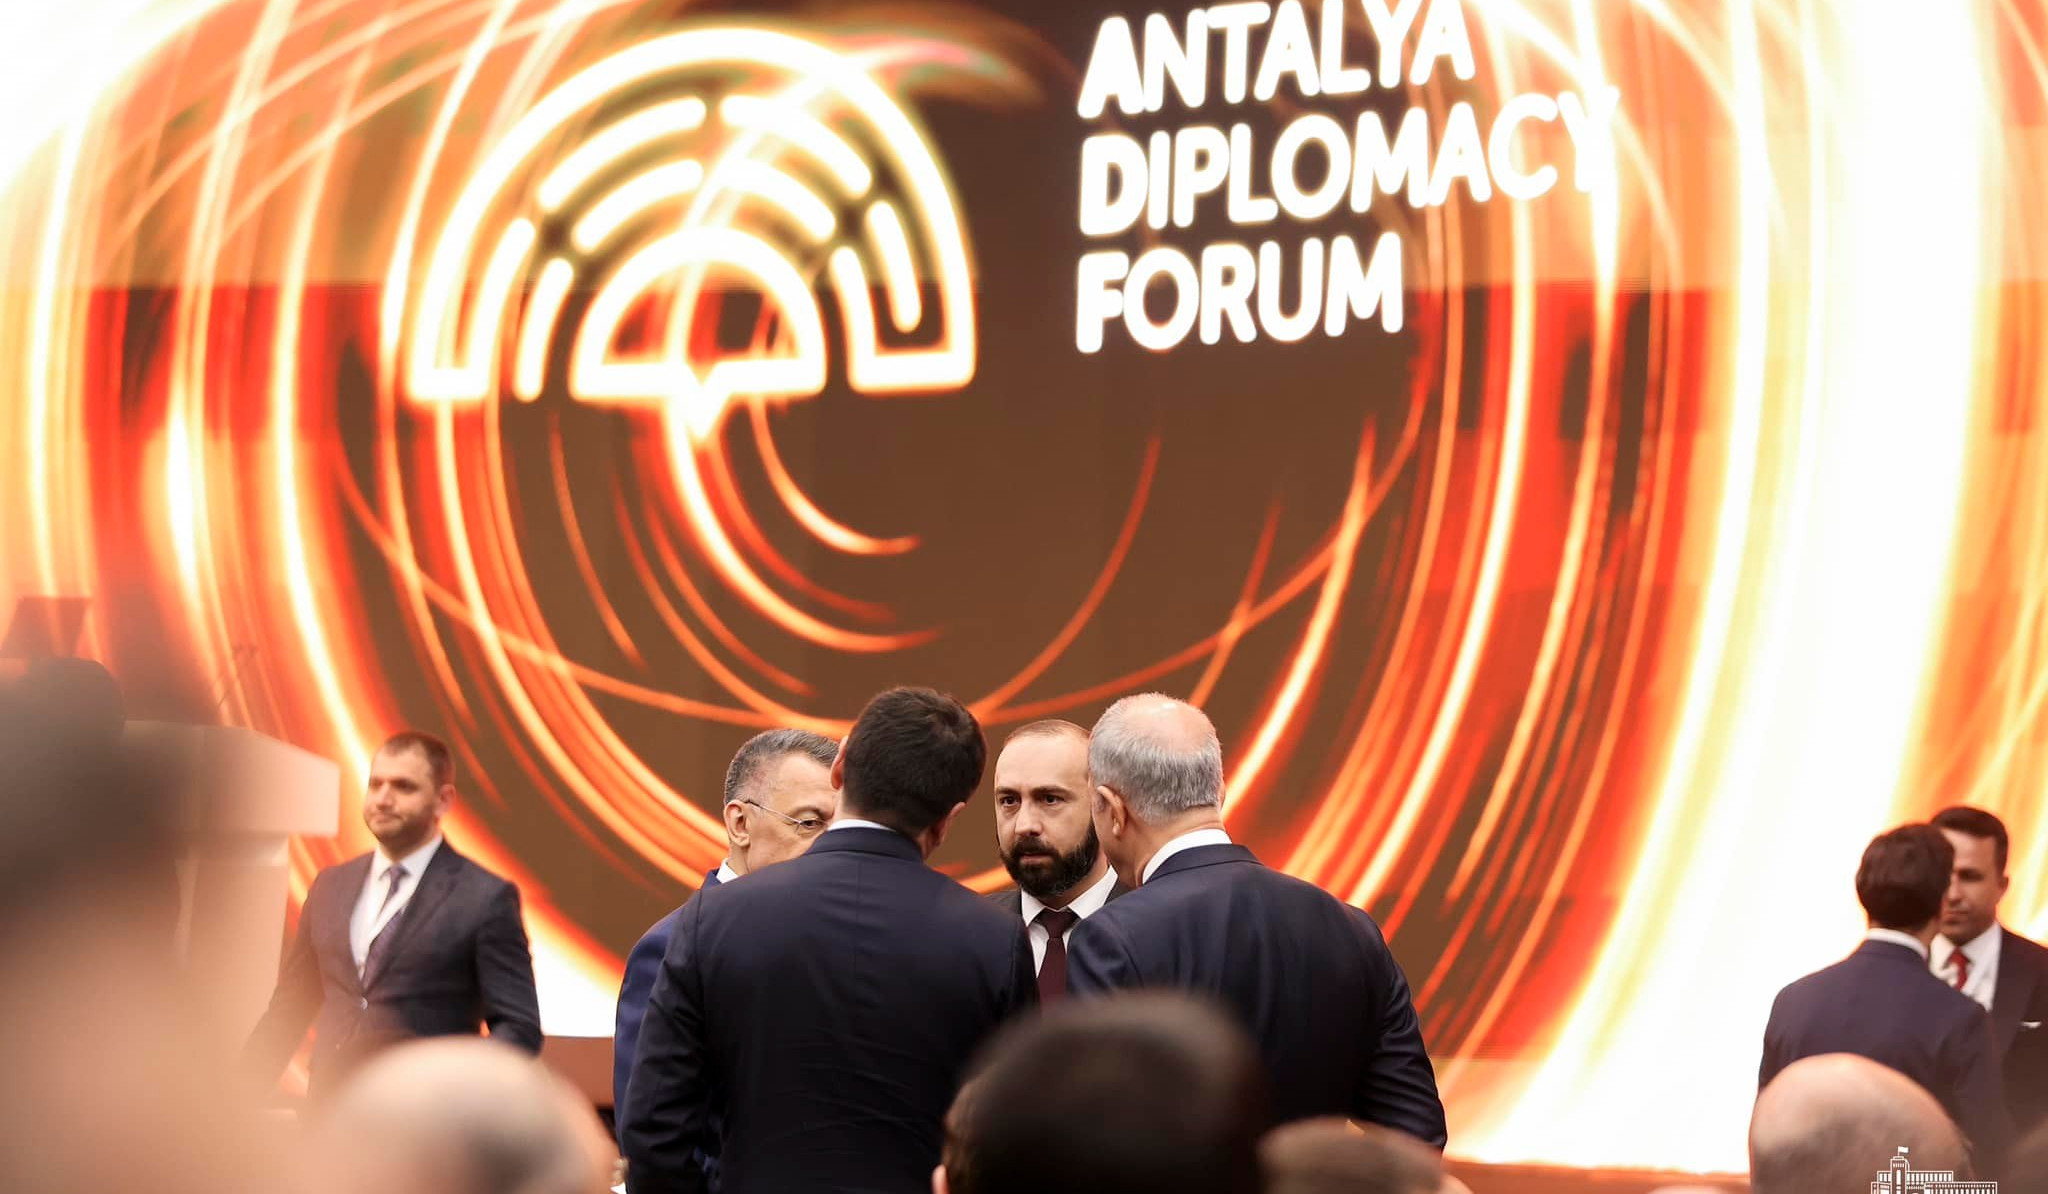 Ararat Mirzoyan participated in opening ceremony of Antalya Diplomacy Forum